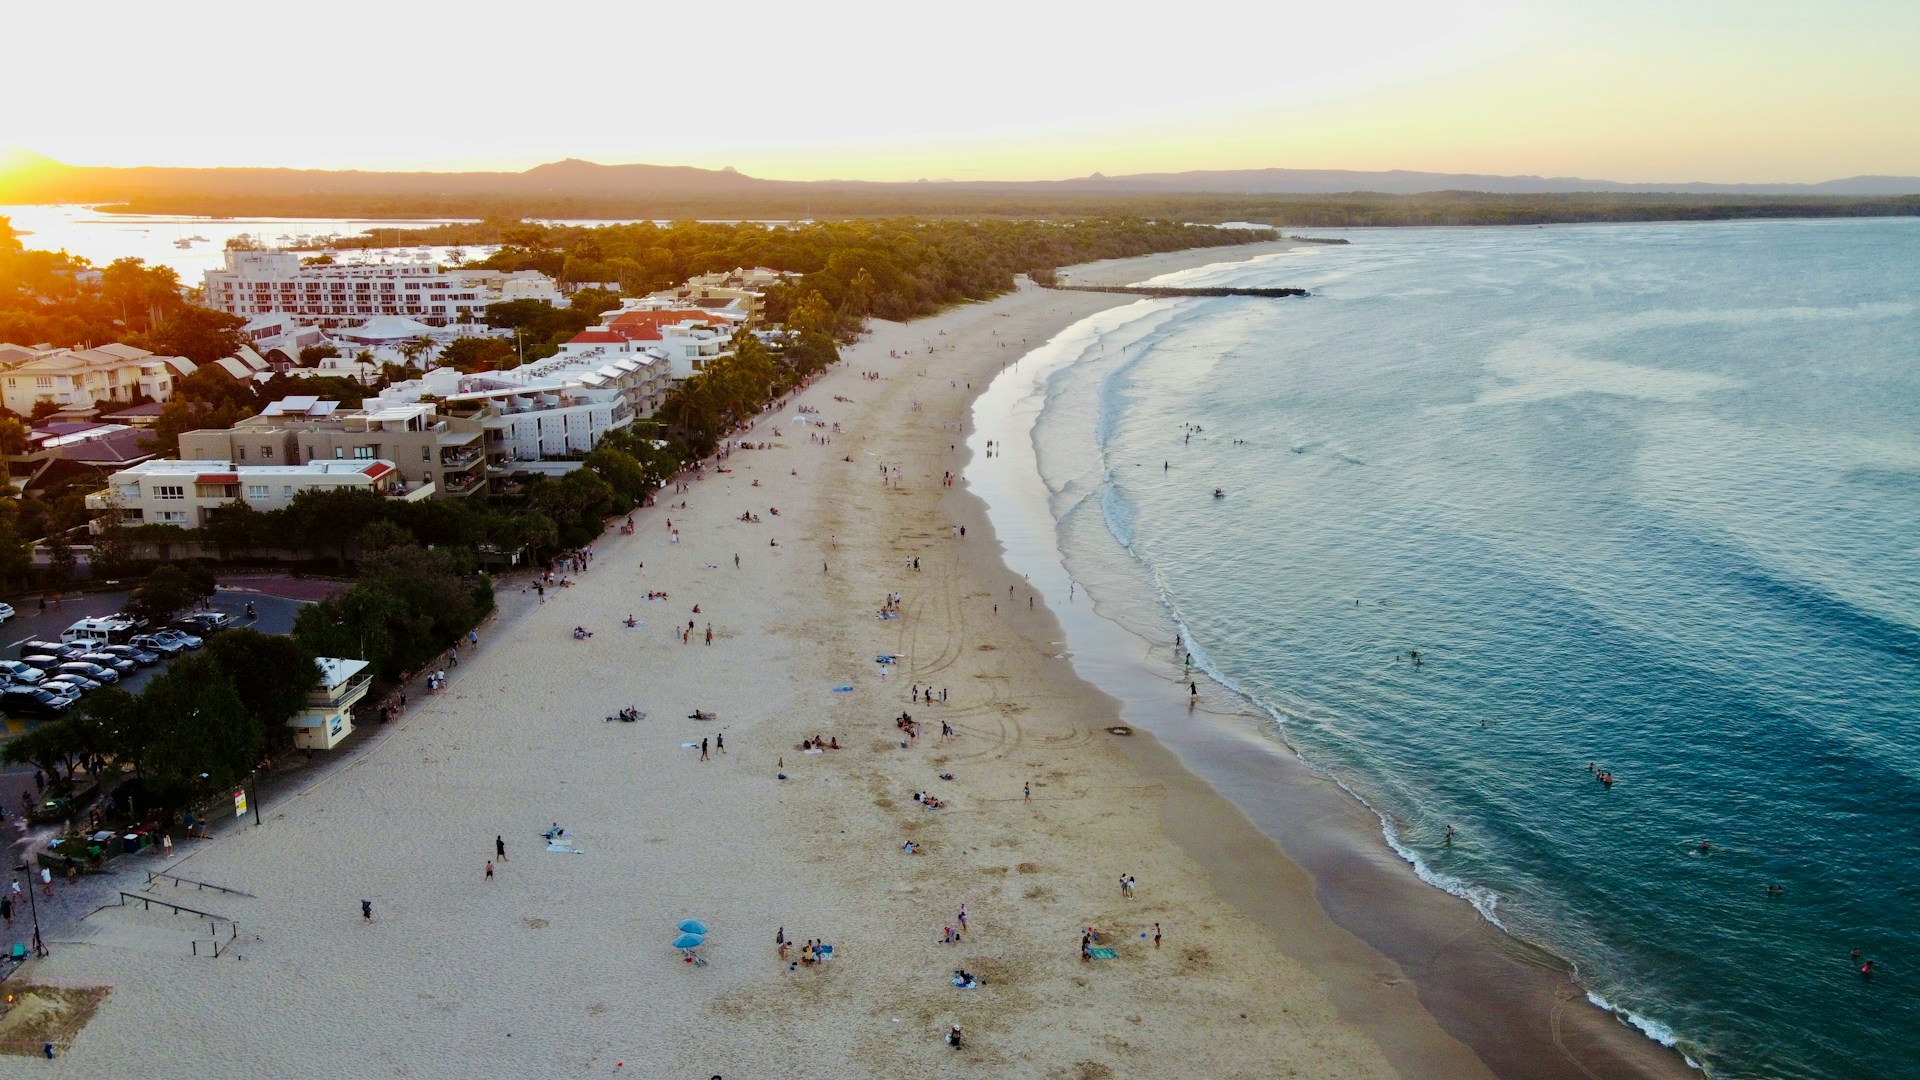 Apartment Units for Sale Noosa Heads Has Today